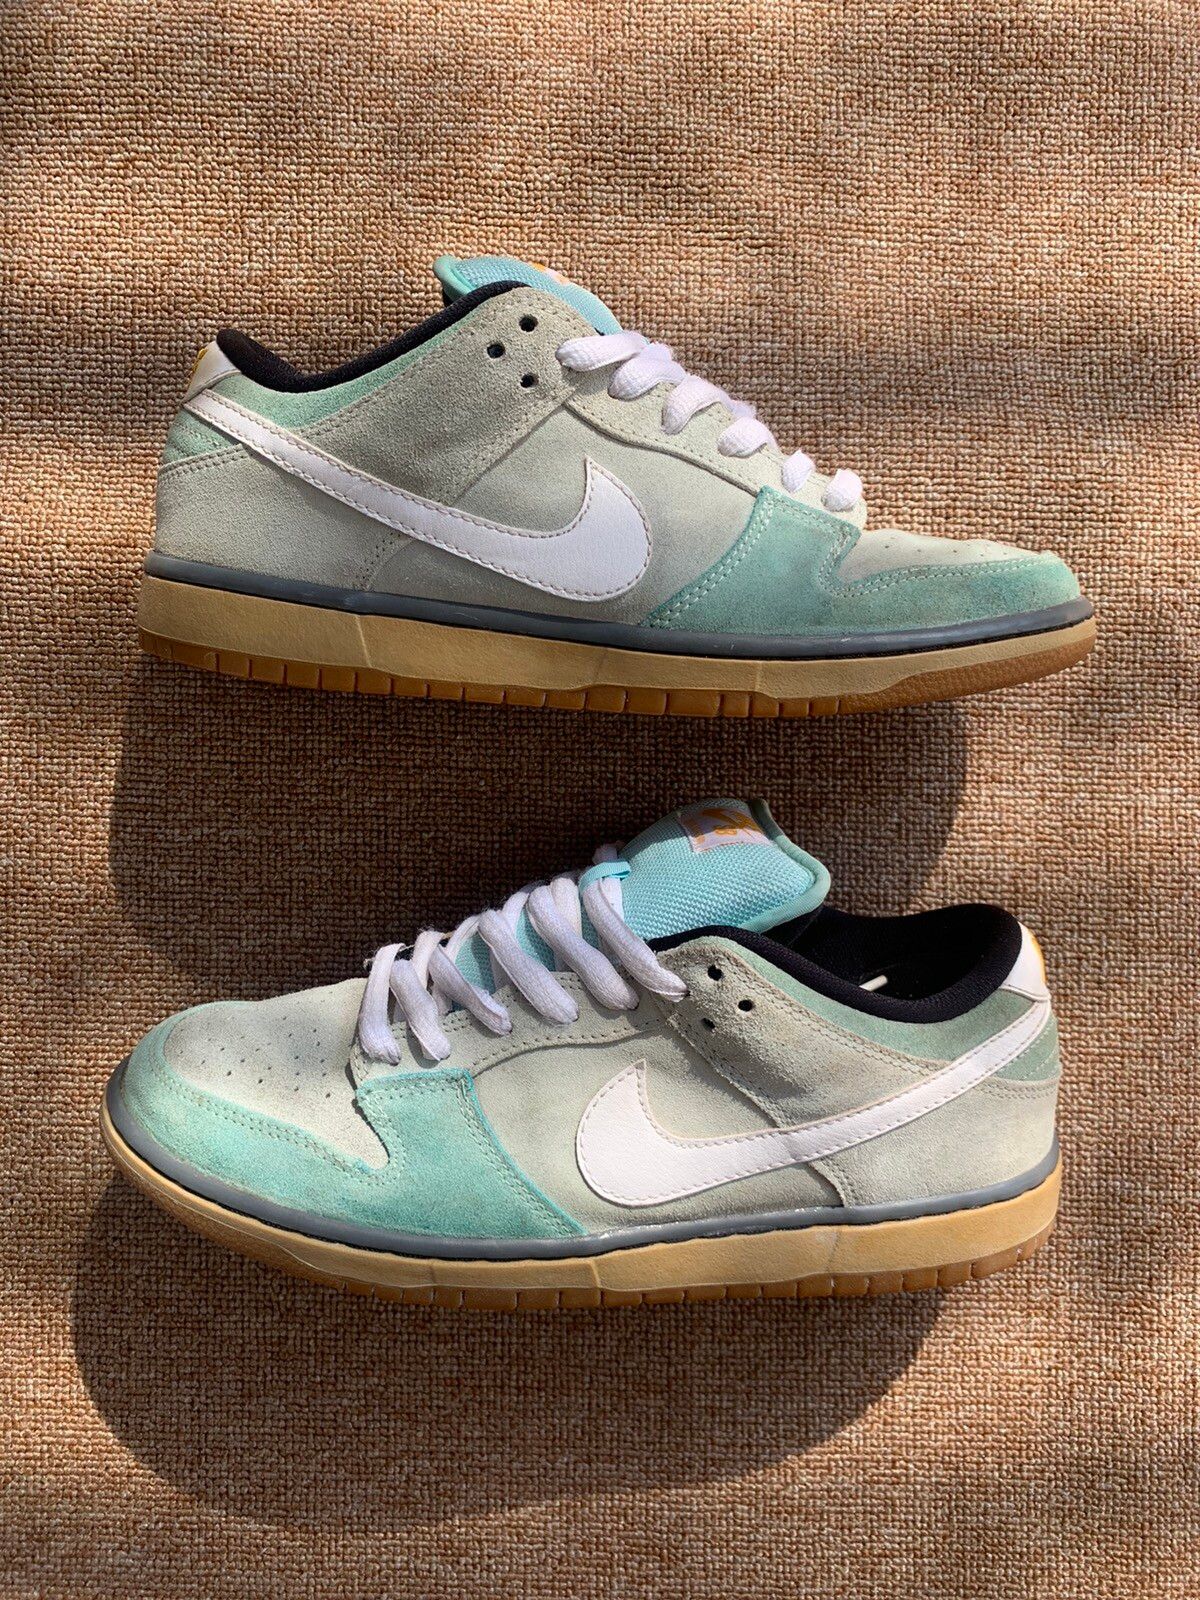 Nike Nike Dunk Low Pro Sb Gulf Of Mexico | Grailed